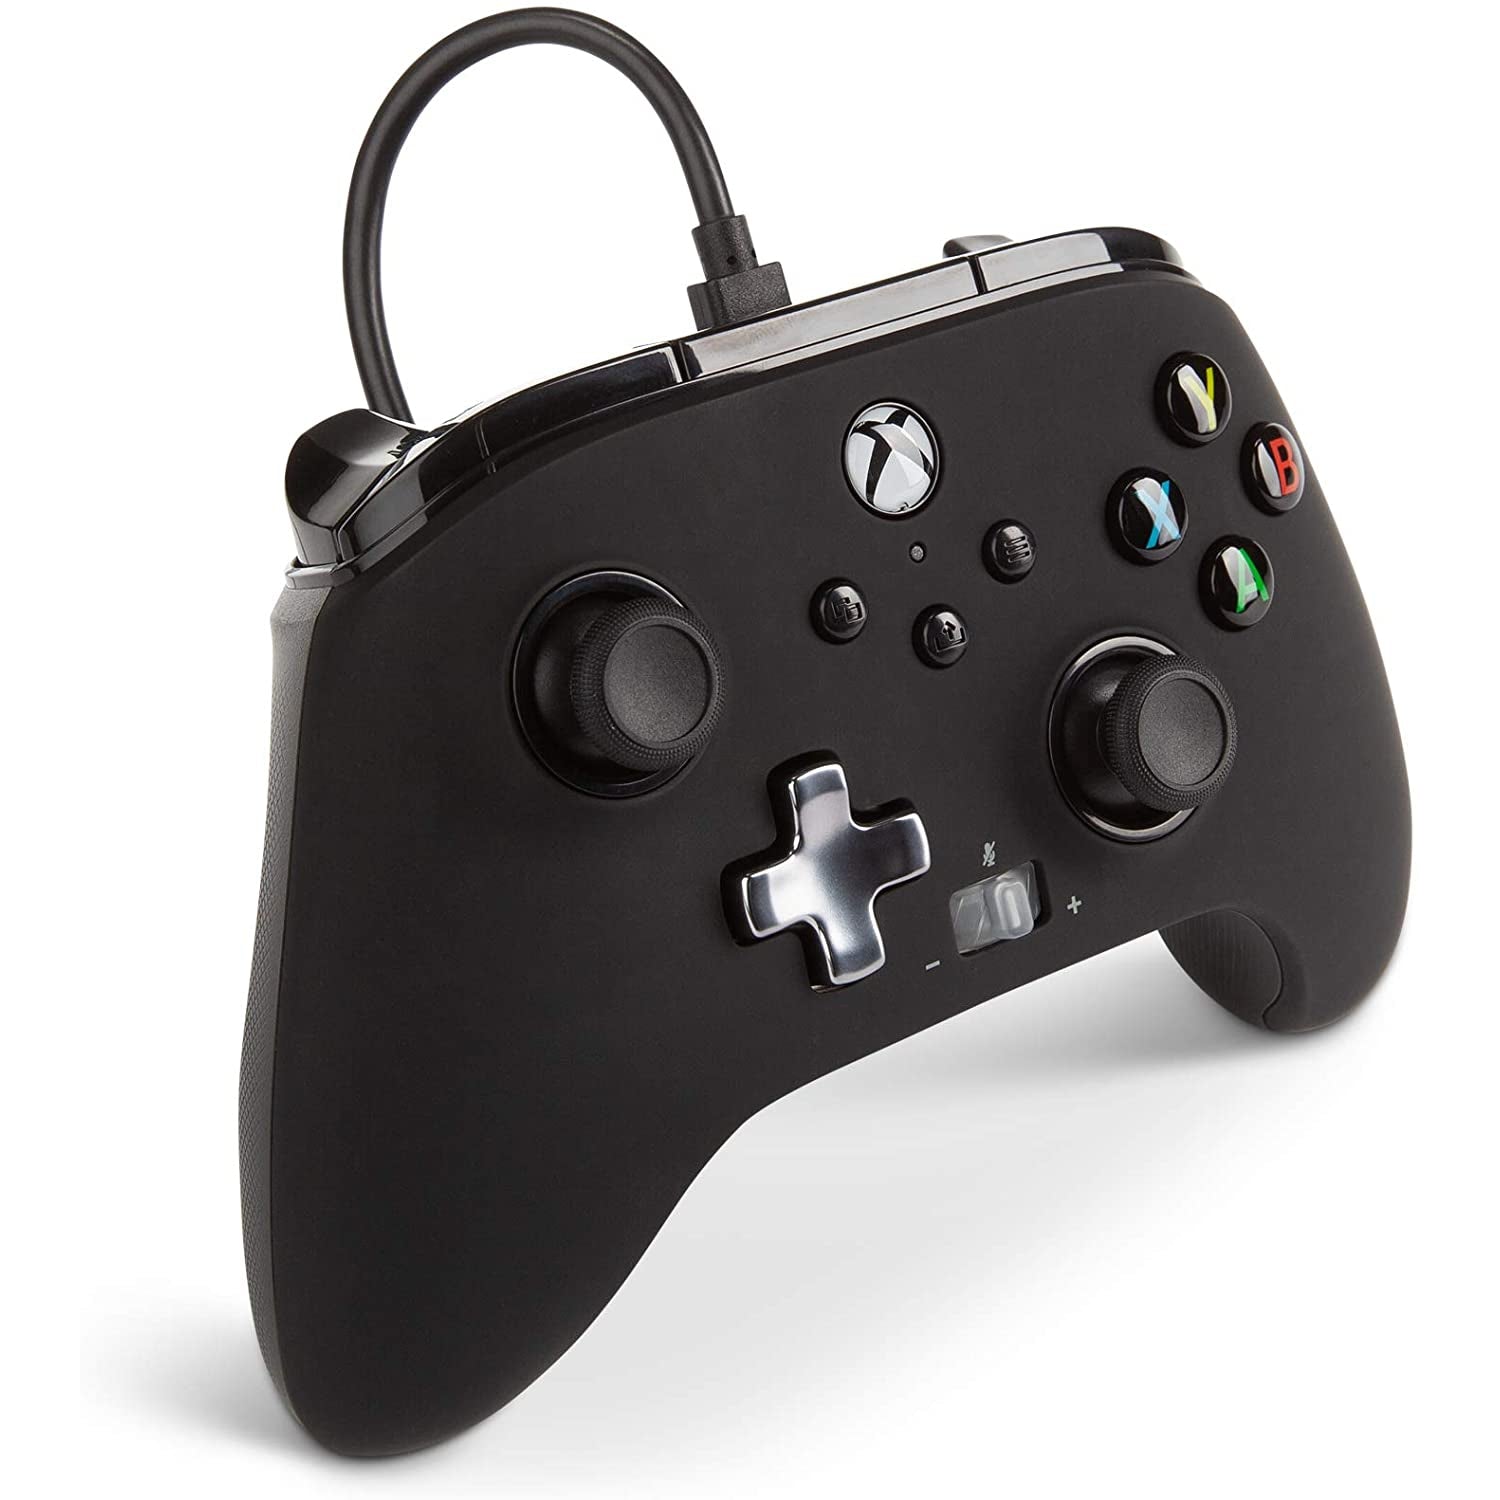 PowerA Enhanced Wired Controller for Xbox Series X|S - Black - New